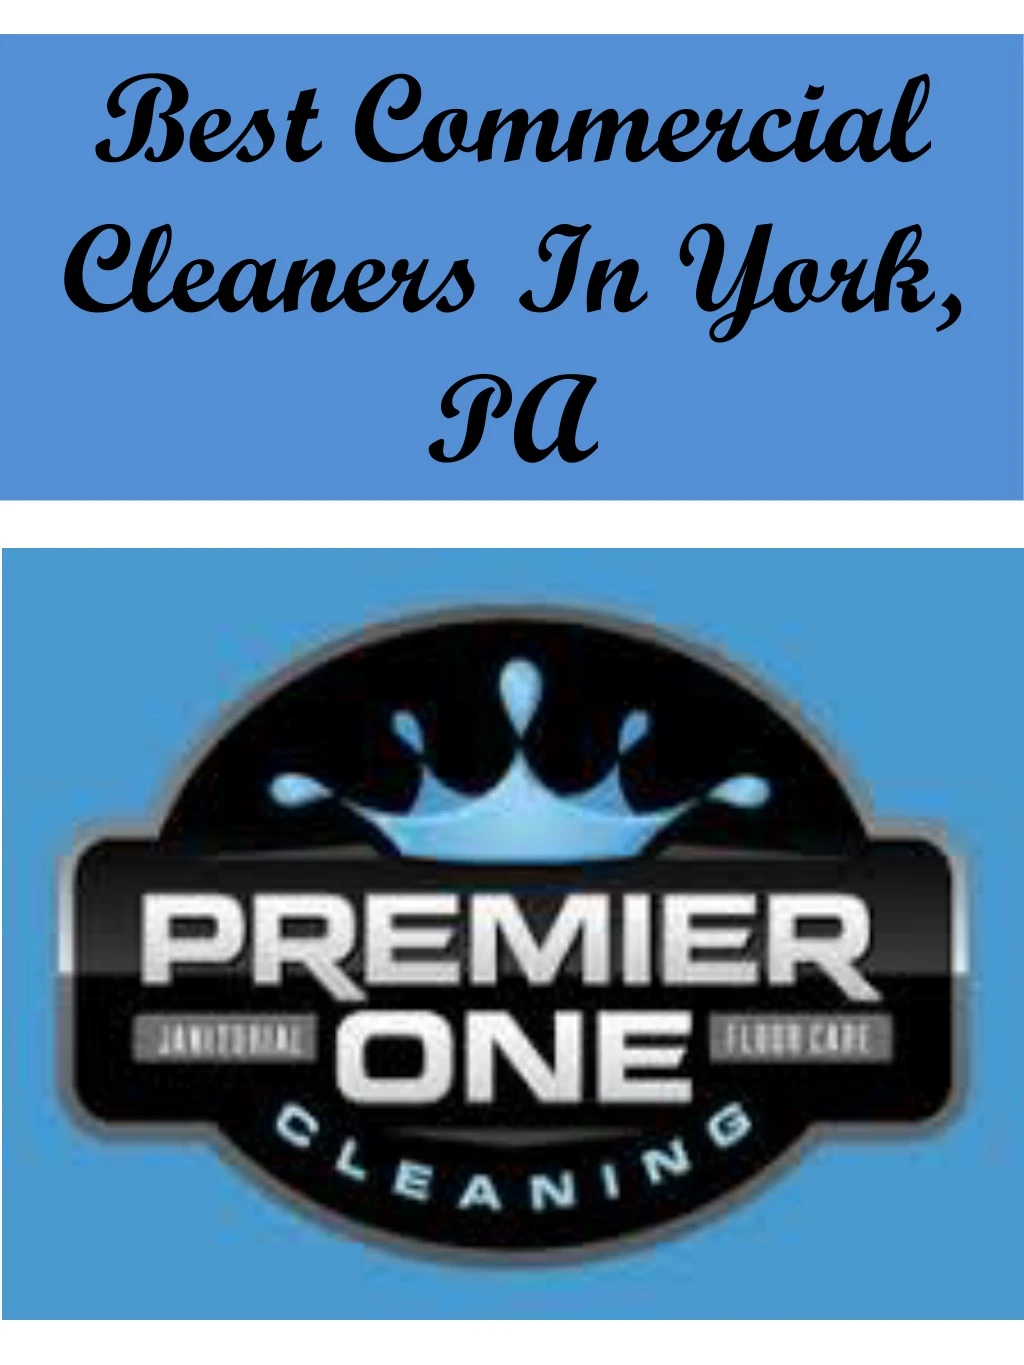 best commercial cleaners in york pa